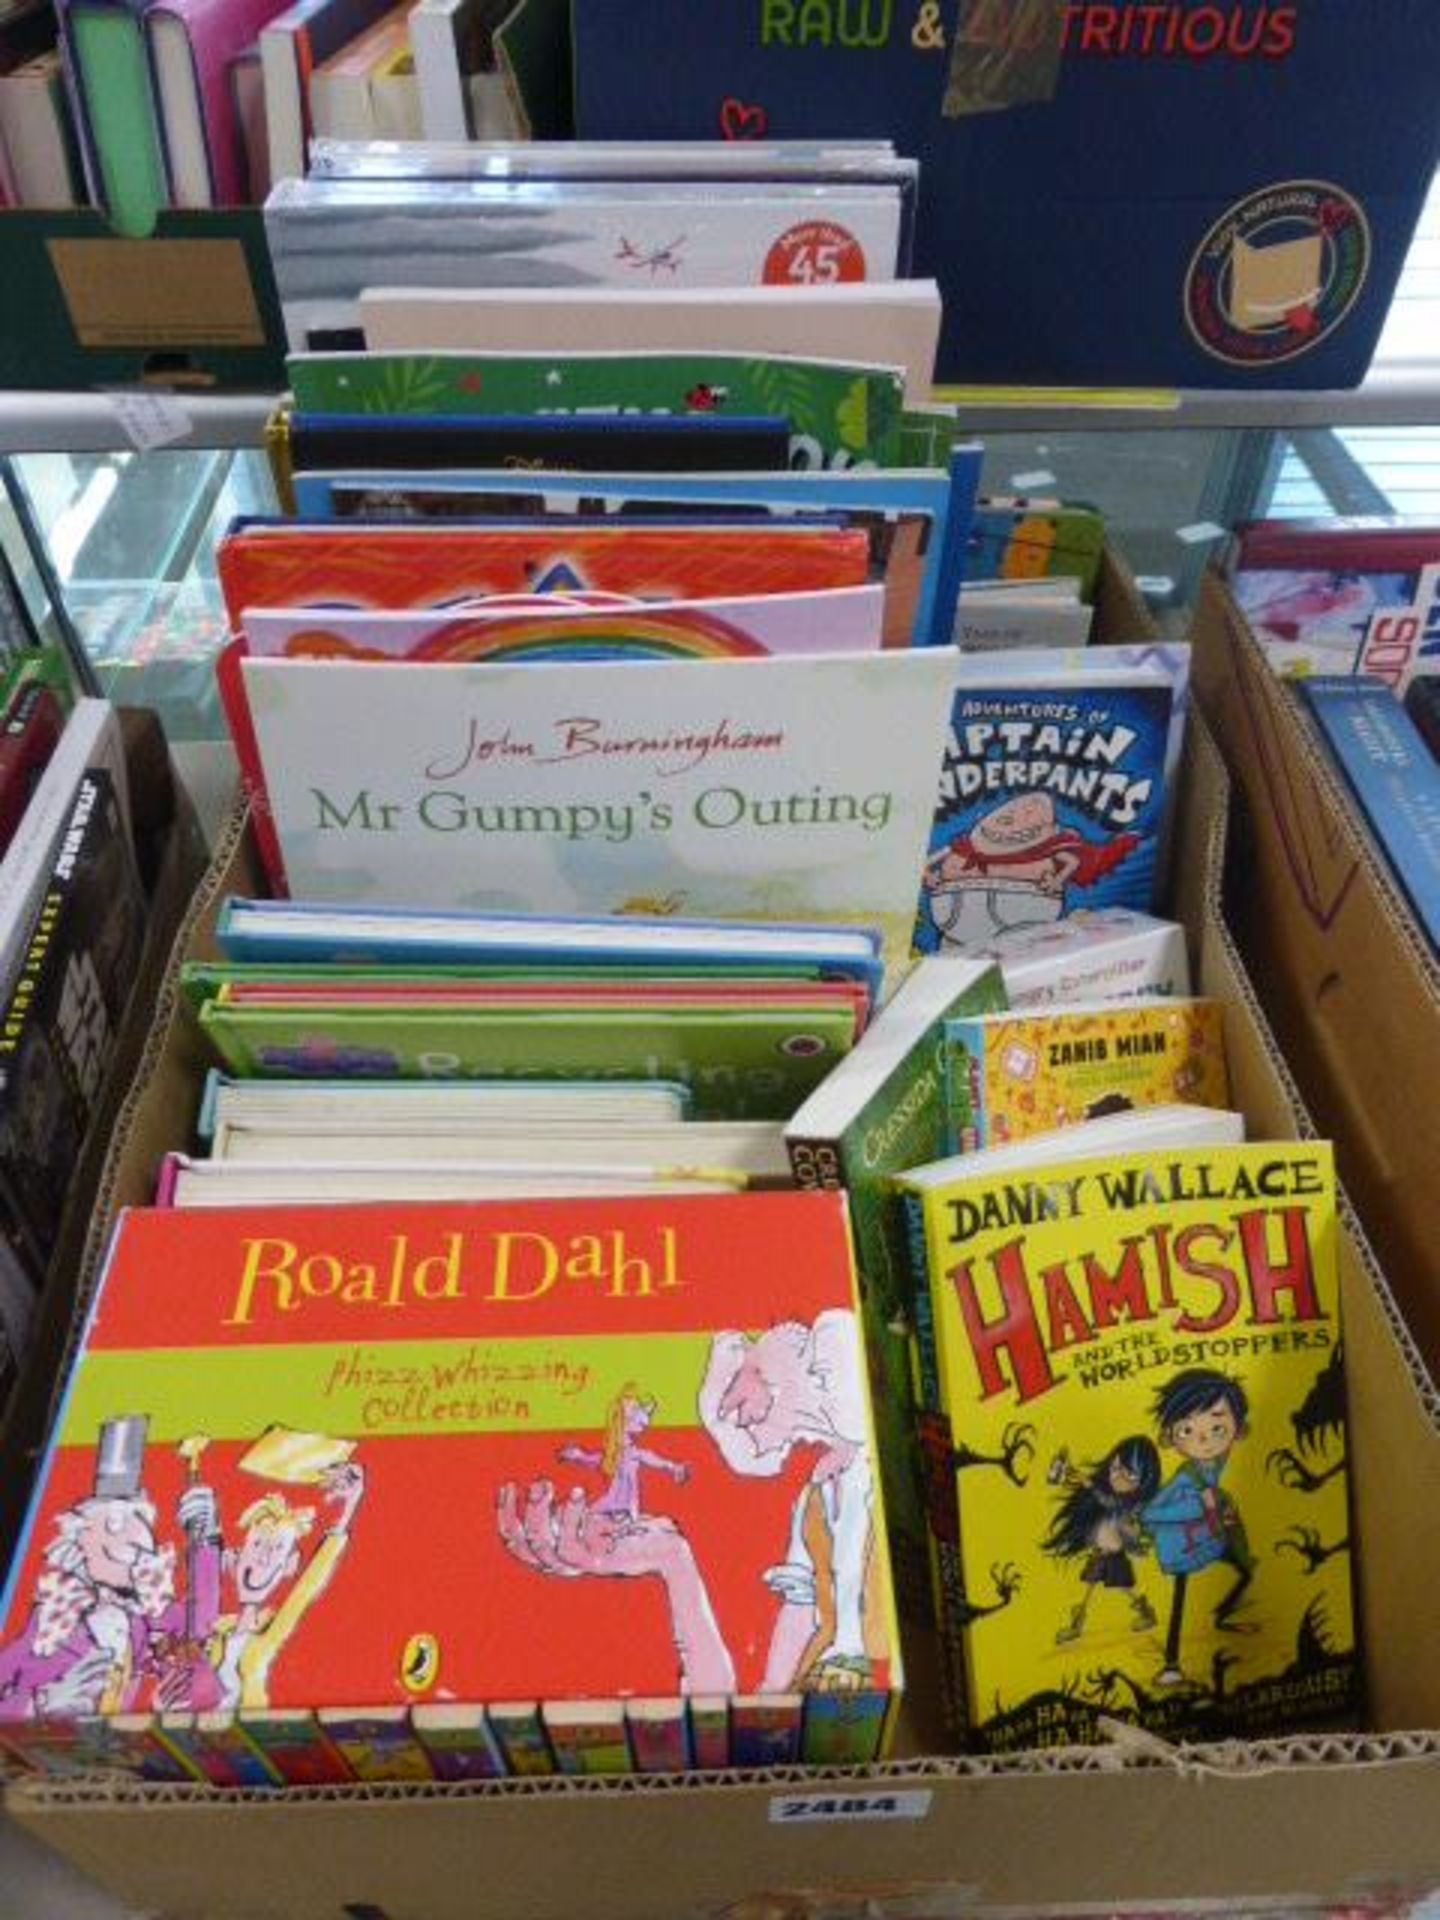 Tray containing various childrens books including a Ronald Dahl collection published by Penguin